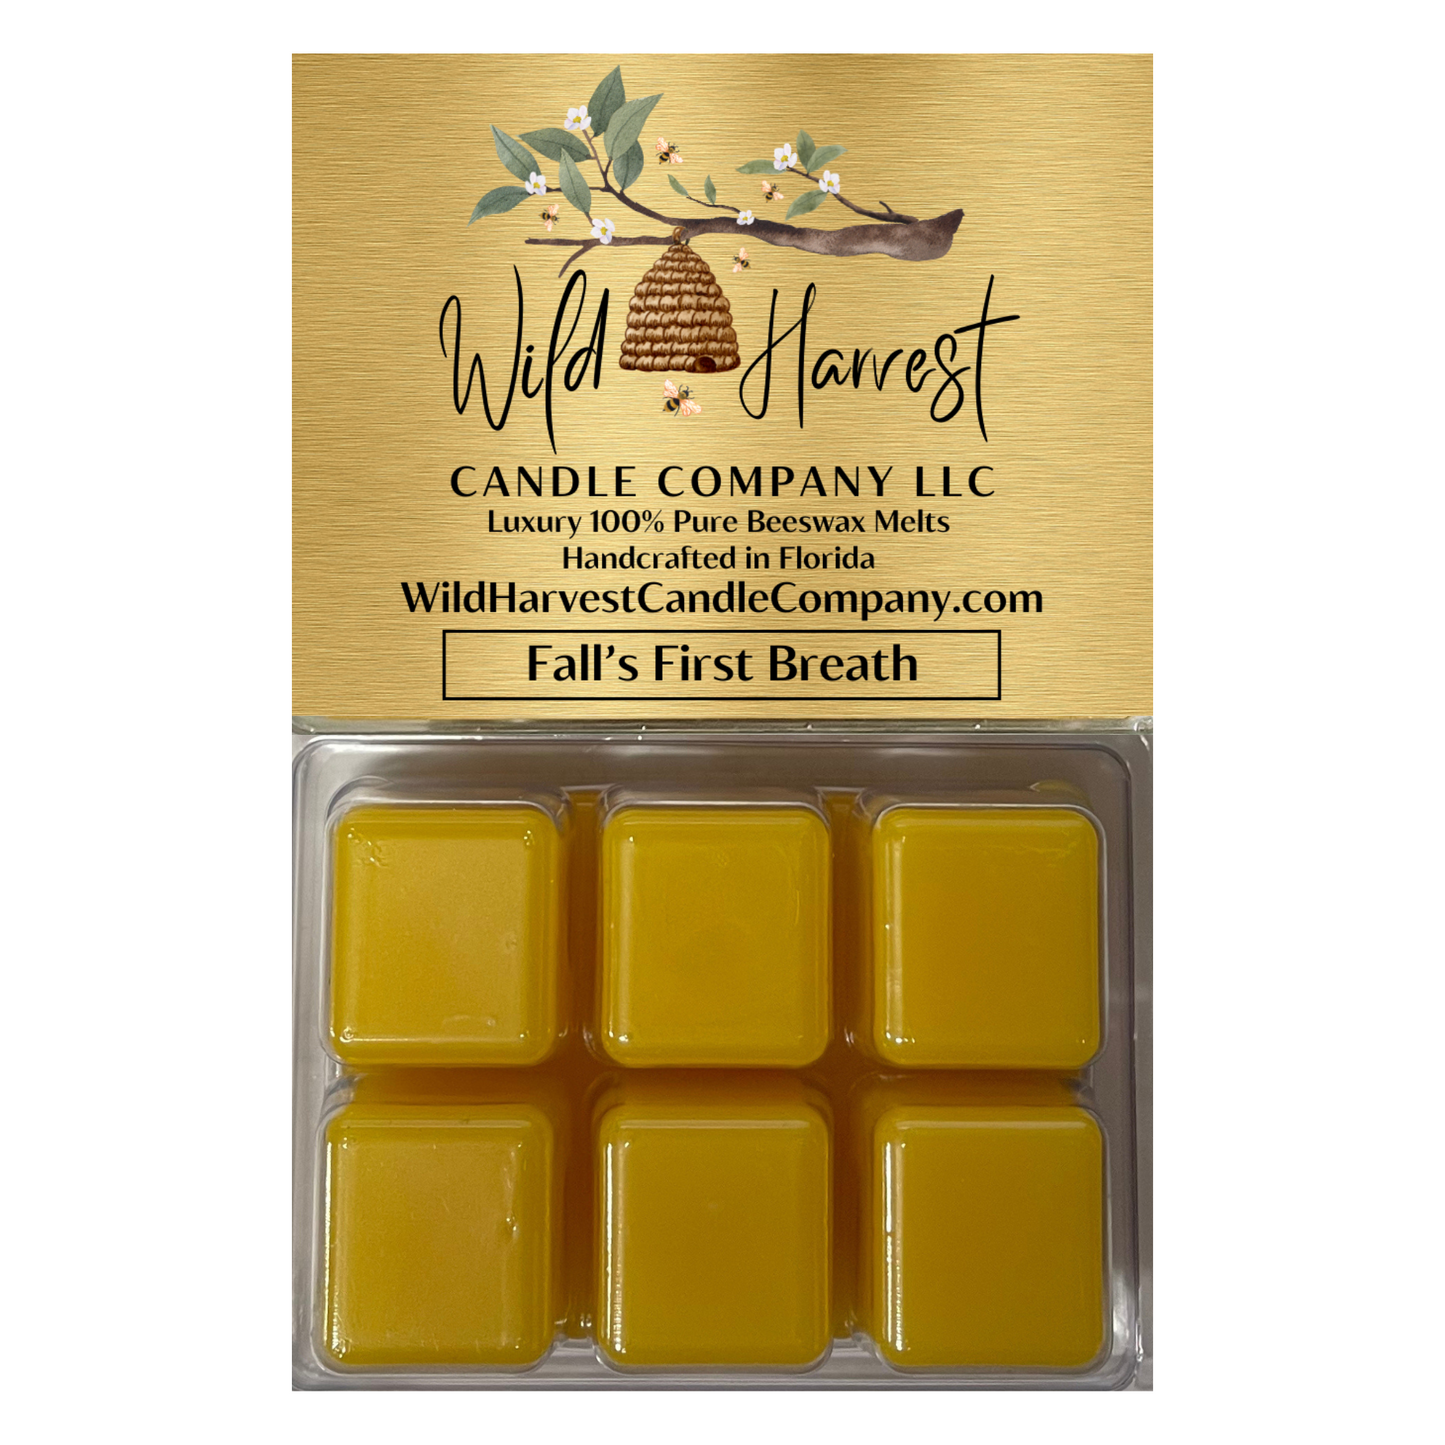 Fall's First Breath Scented - Pure Beeswax Melts for Warmers, (1-PACK)